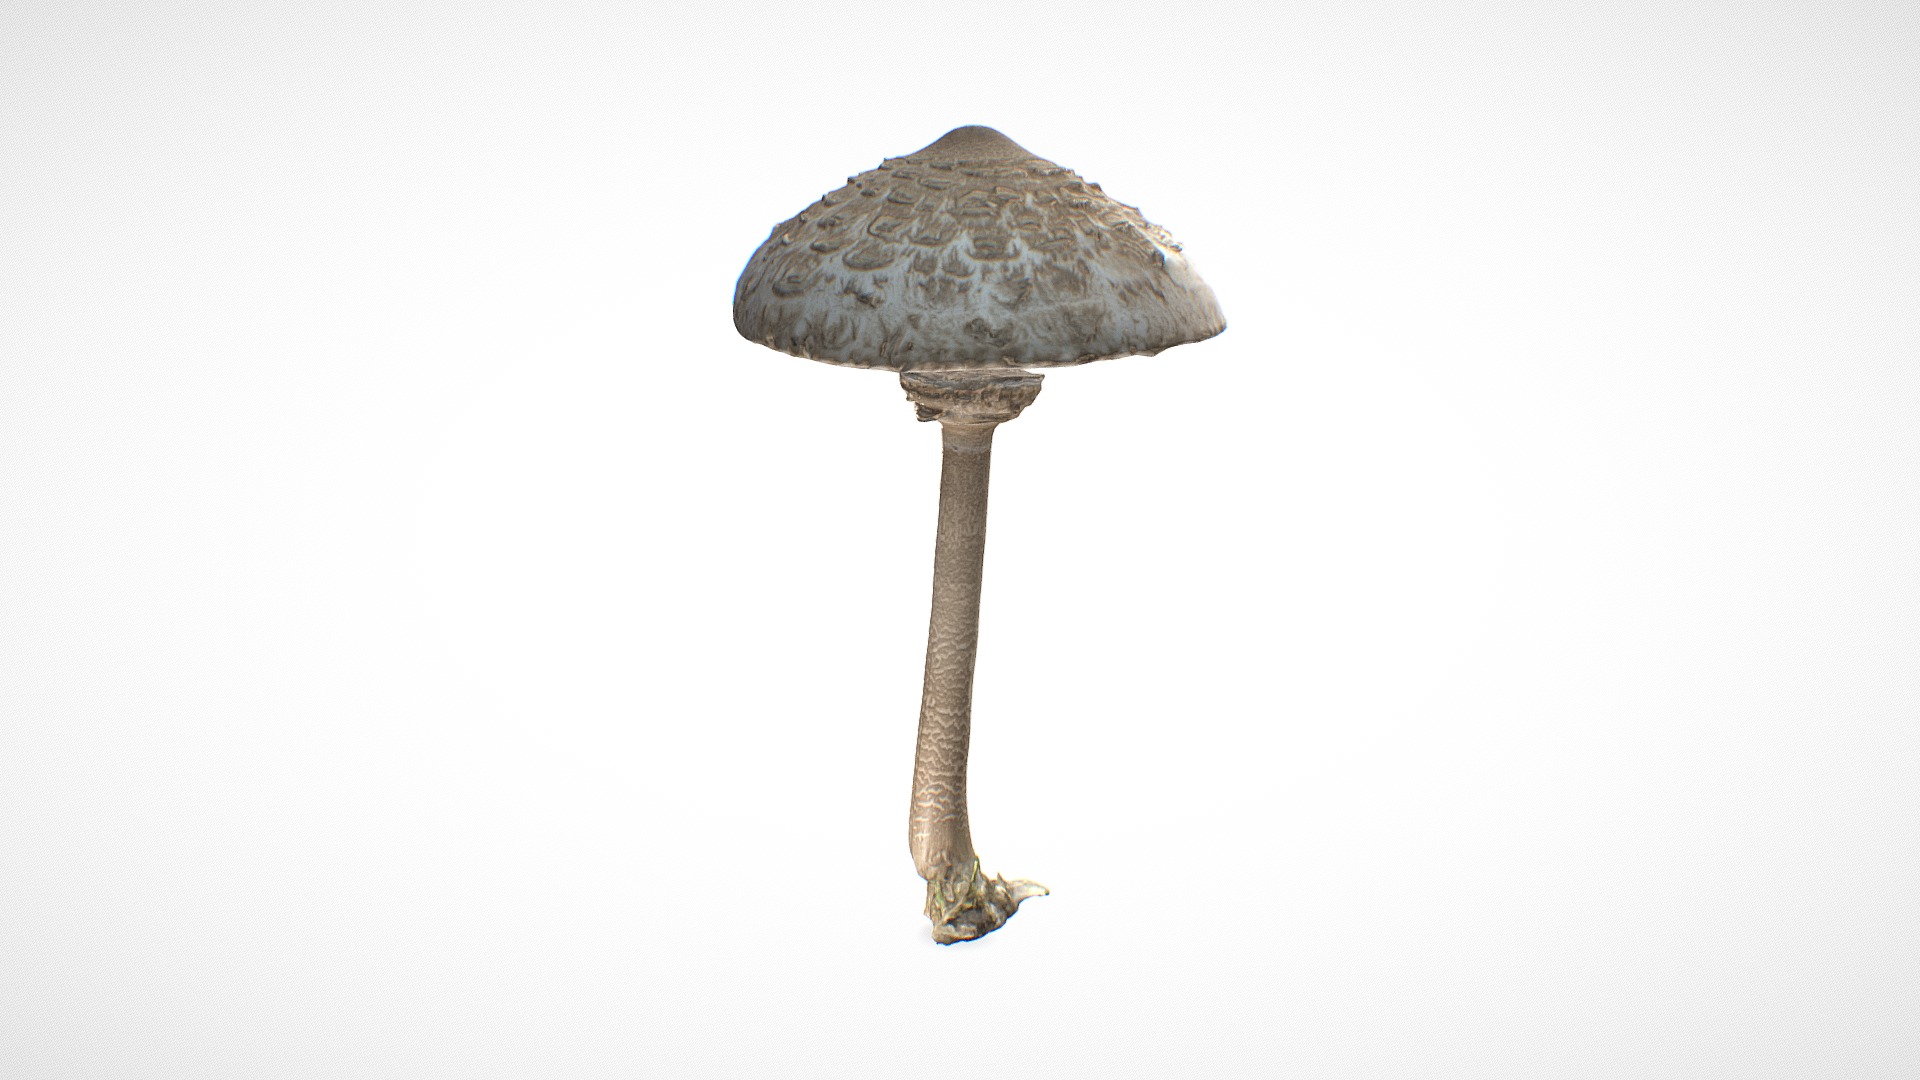 3D model Parasol mushroom 5 – retopo 8K PBR - This is a 3D model of the Parasol mushroom 5 - retopo 8K PBR. The 3D model is about a mushroom with a white background.